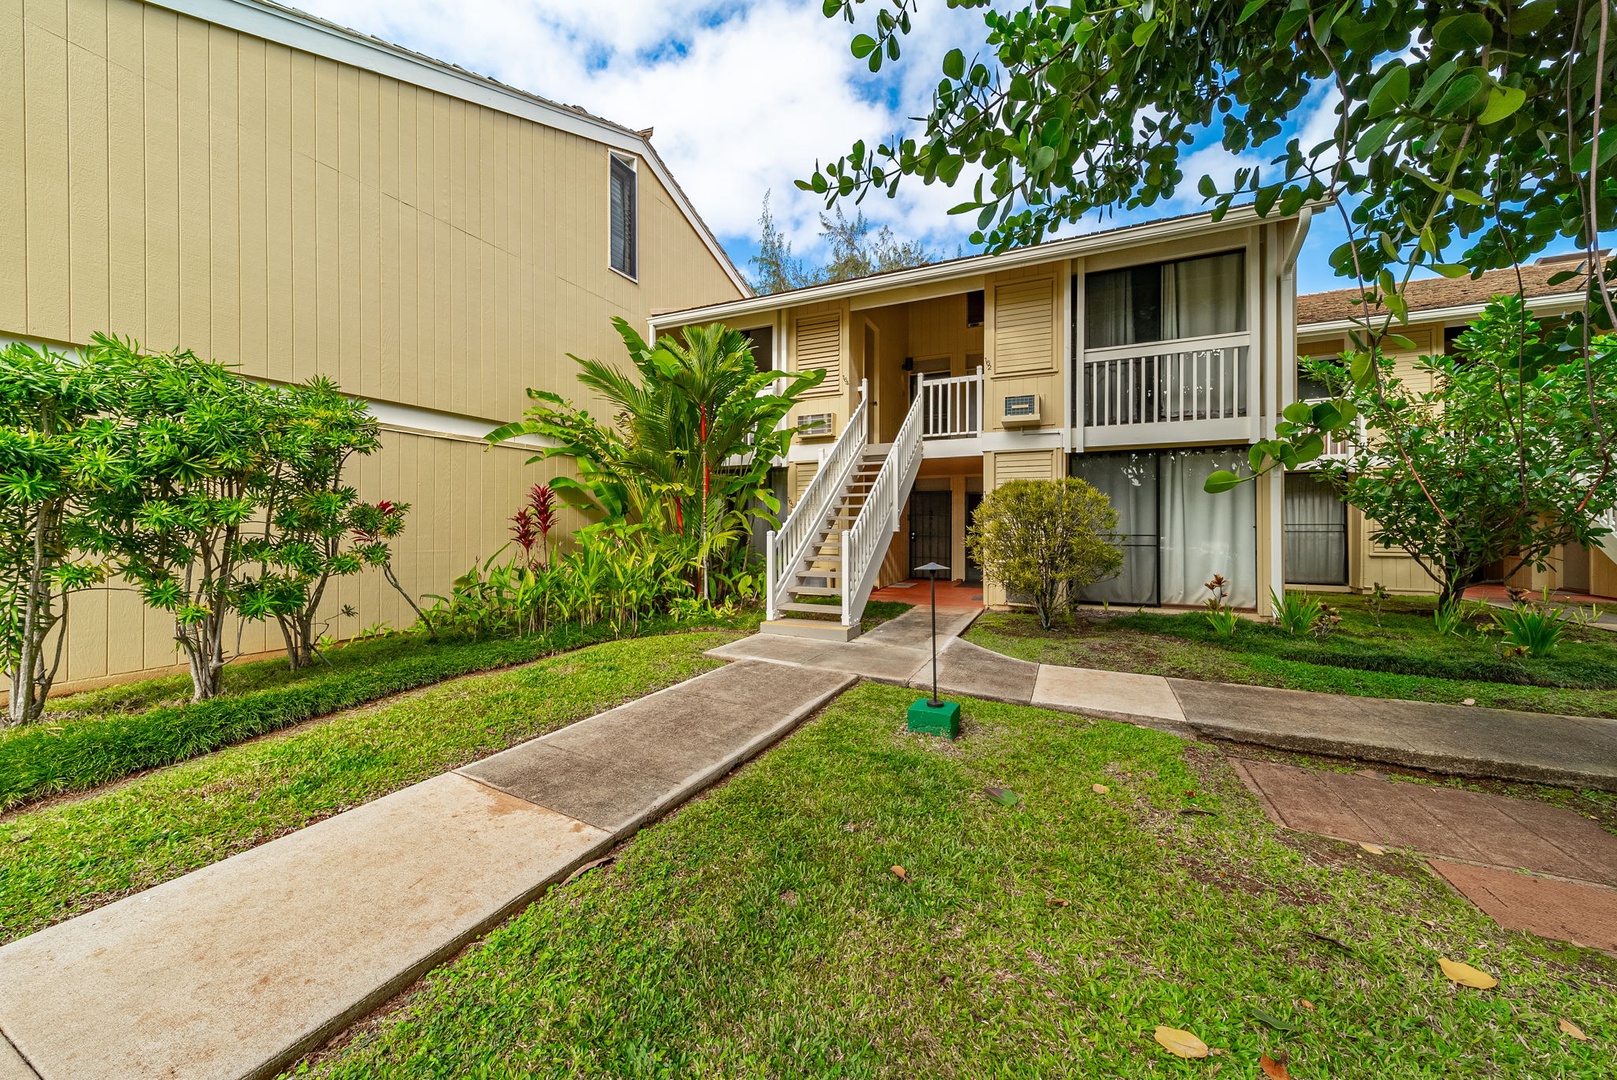 Kahuku Vacation Rentals, Kuilima Estates East #164 - Welcome to unit 164!